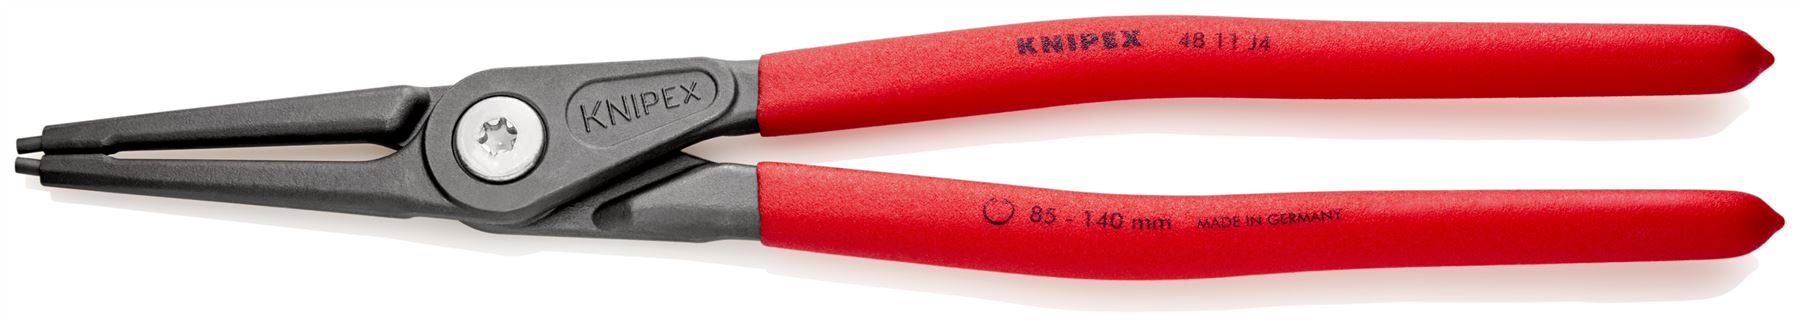 KNIPEX Precision Circlip Pliers for Internal Circlips in Bore Holes 320mm 3.2mm Diameter Tips 40 11 J4